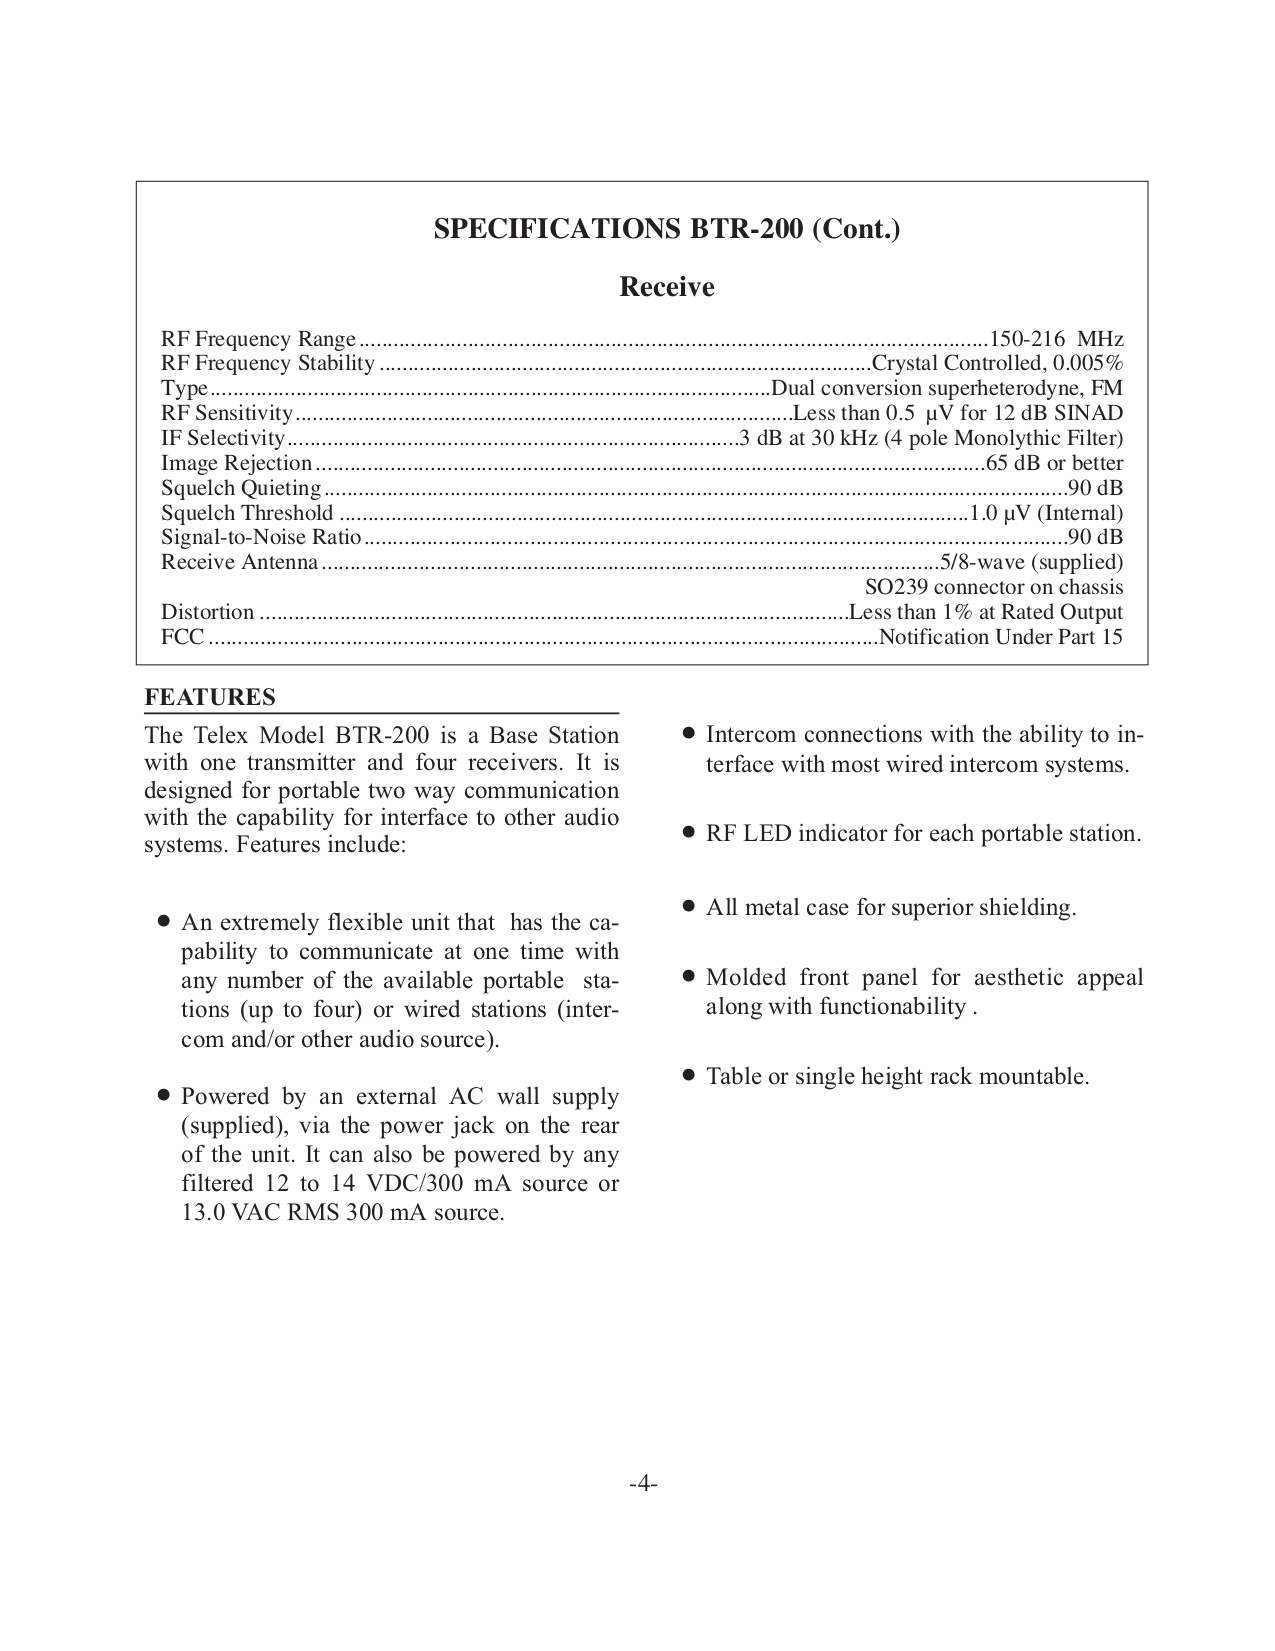 Telex Other RMS300 IntercomSystem pdf page preview